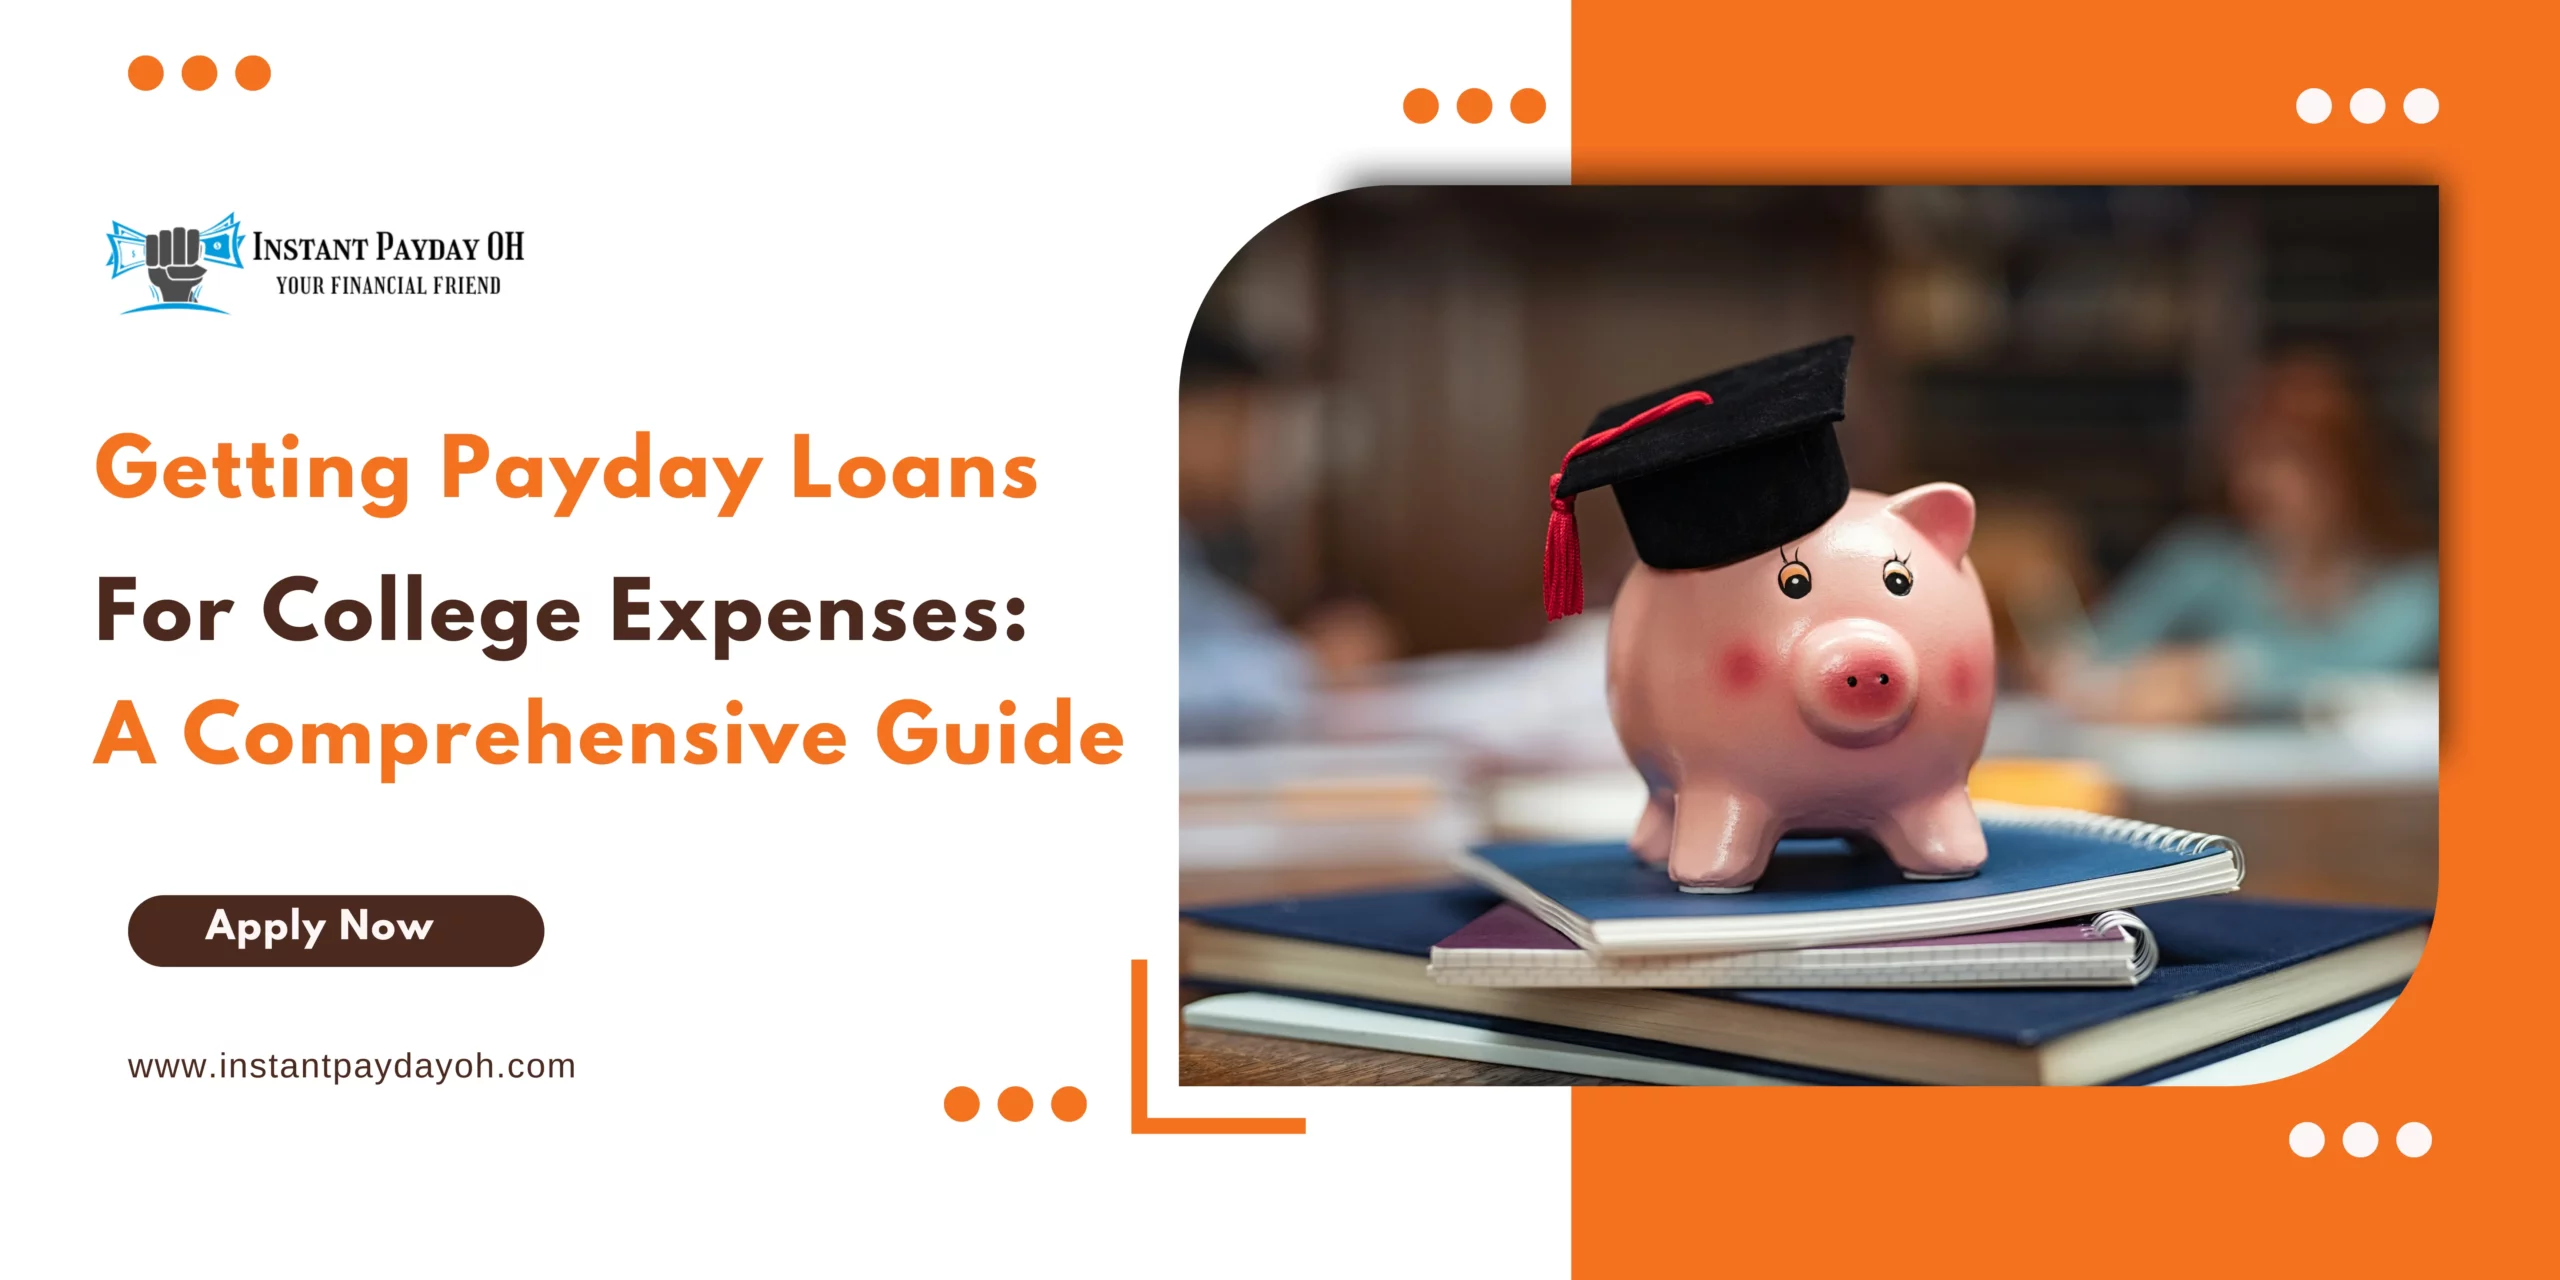 Getting Payday Loans for College Expenses A Comprehensive Guide